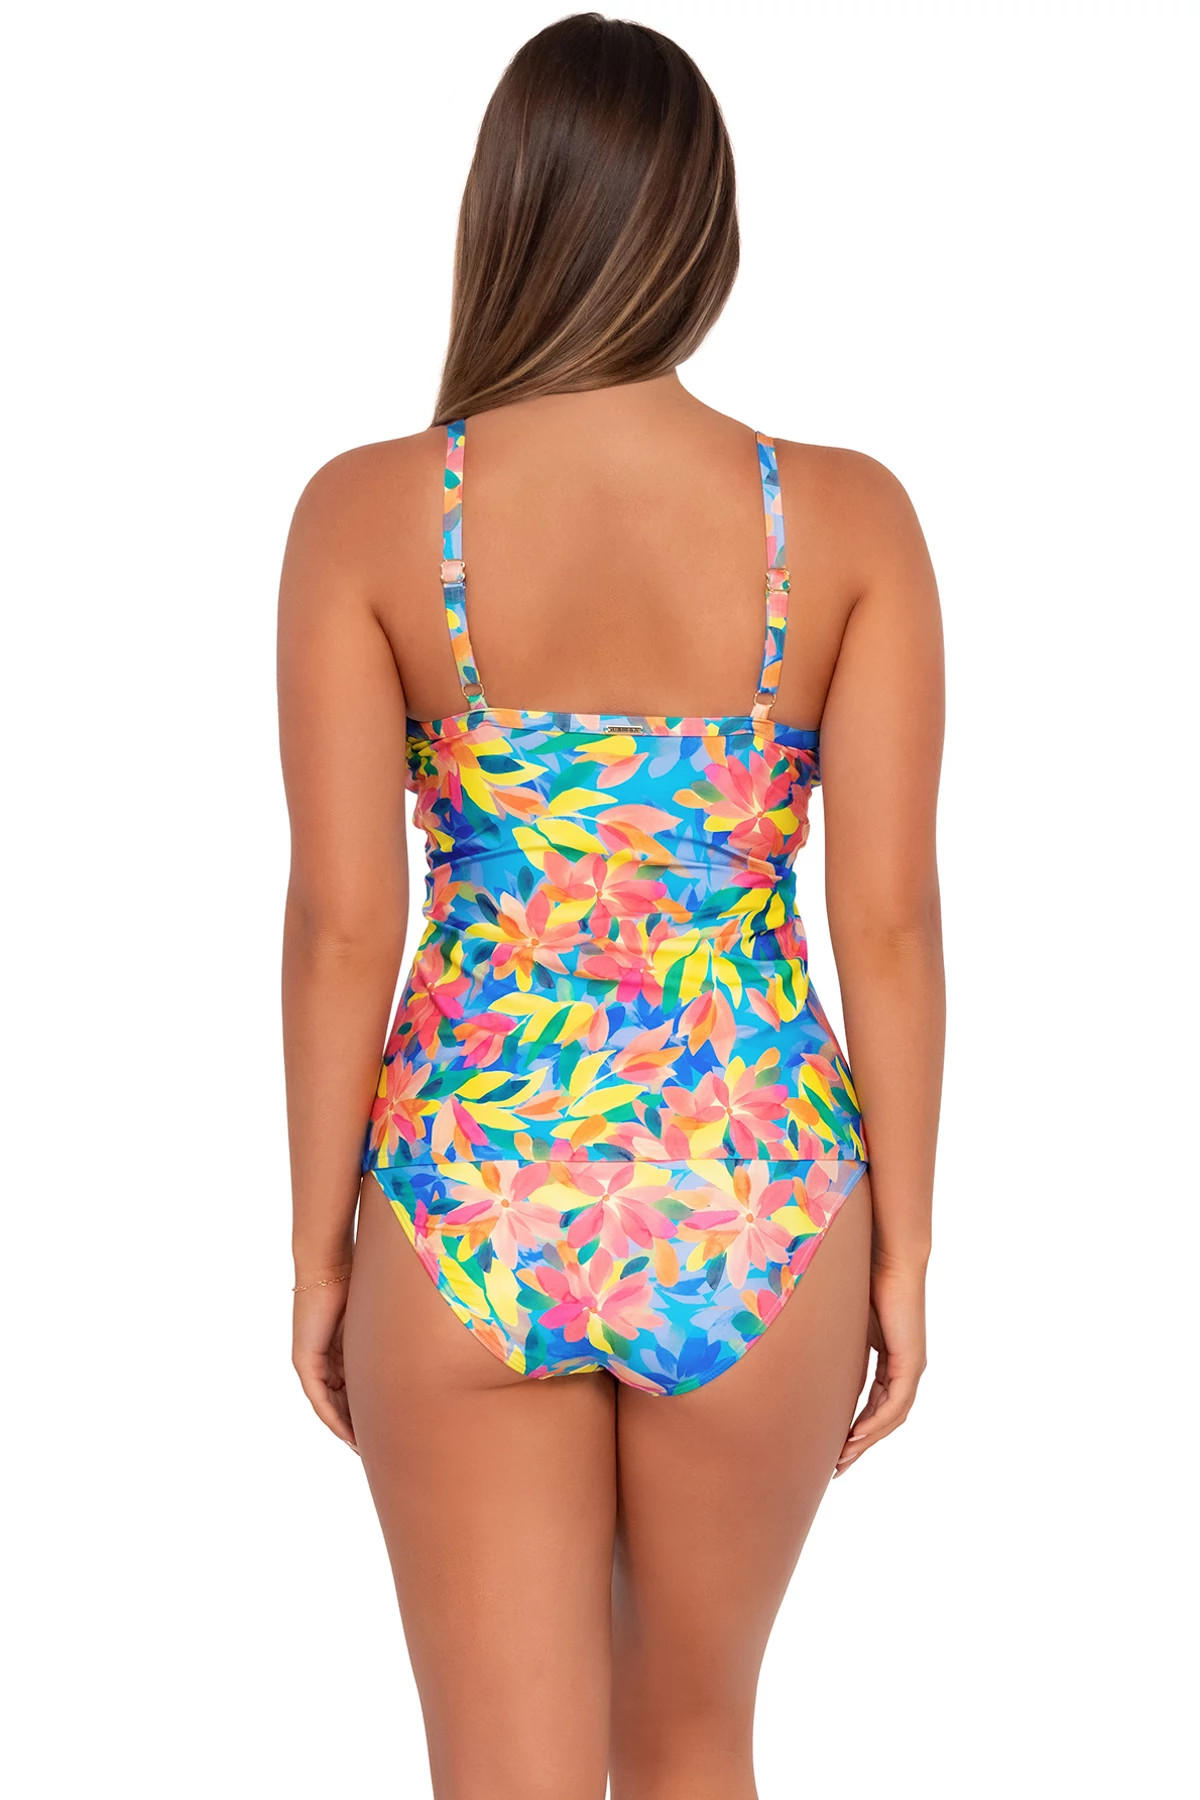 SHORELINE PETALS Forever Underwire Tankini Top (D+ Cup) image number 2